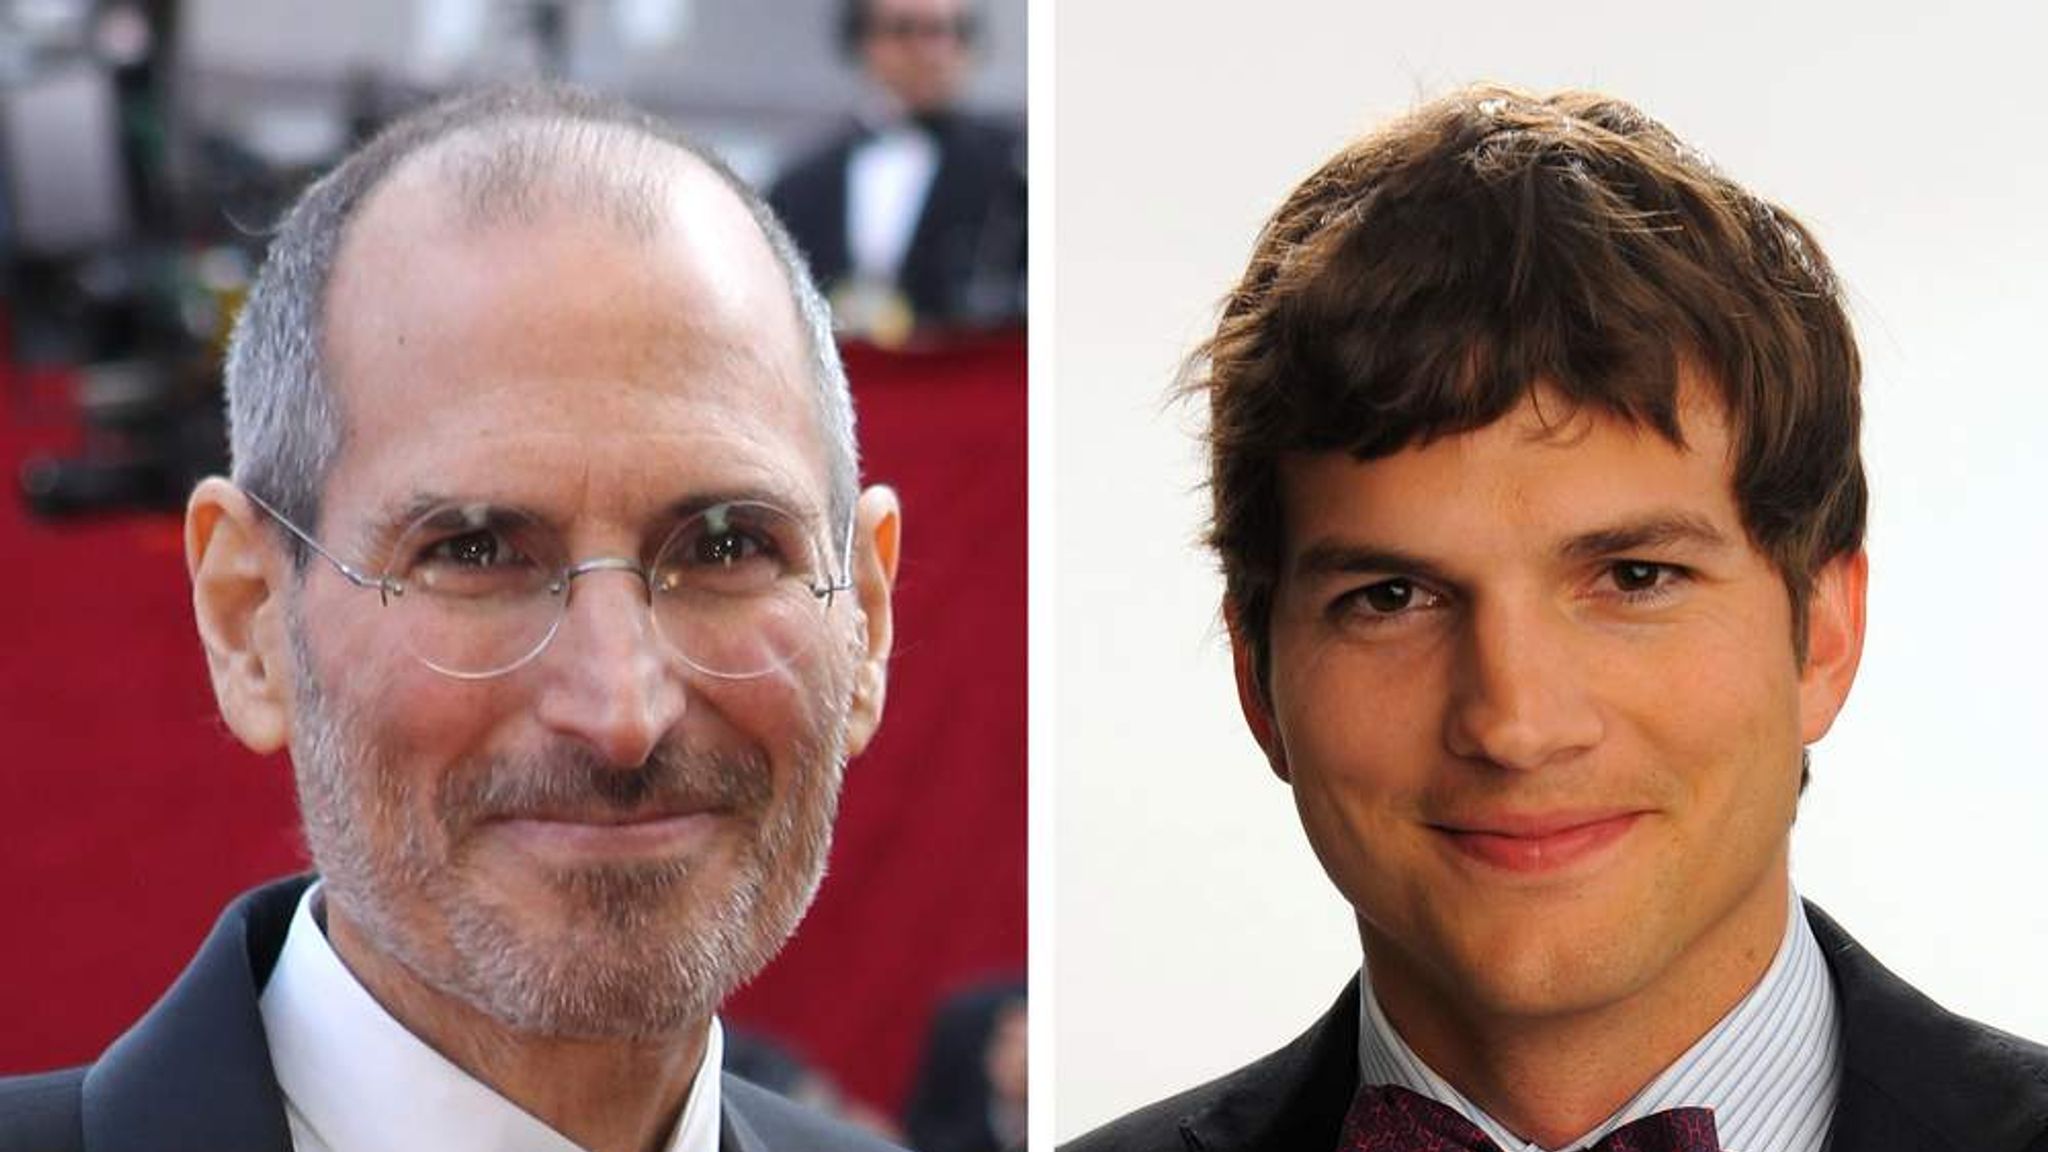 Christian Bale reportedly front-runner for Steve Jobs role in Sony's biopic